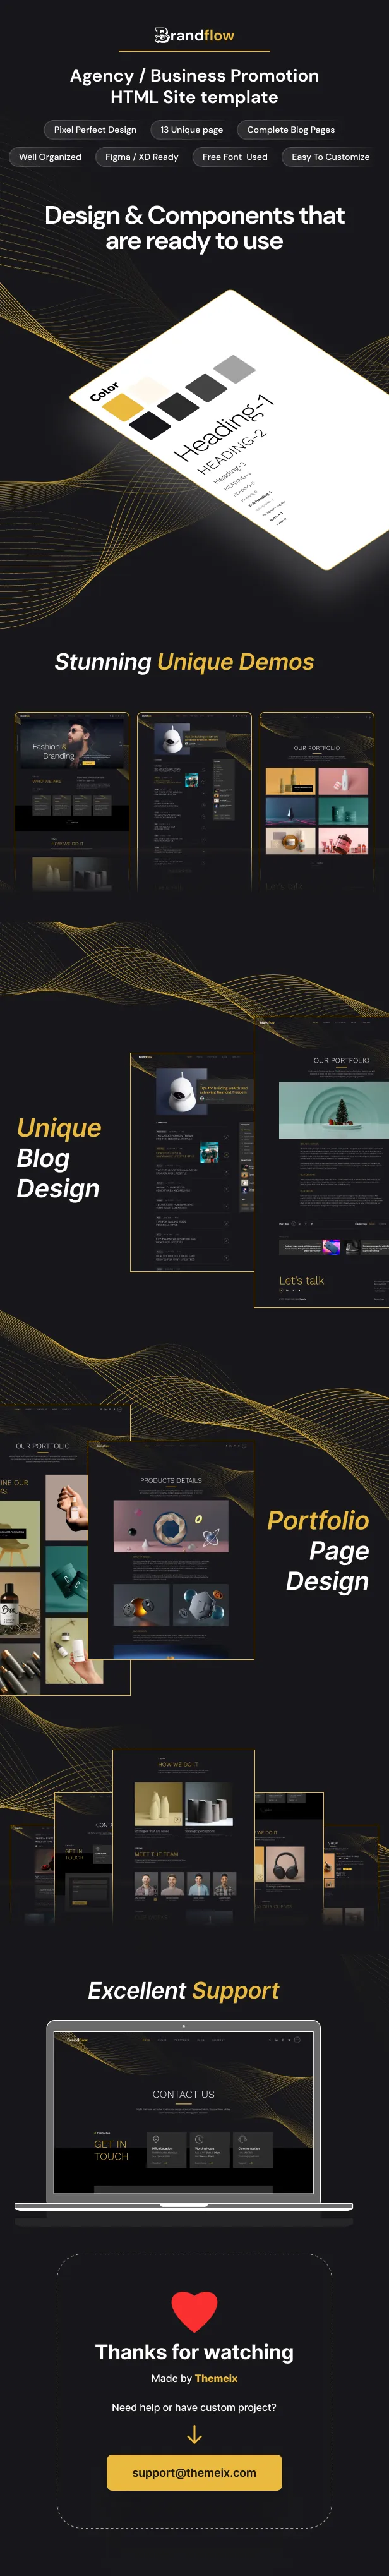 Brandflow - Agency and Business HTML Site Template - 1